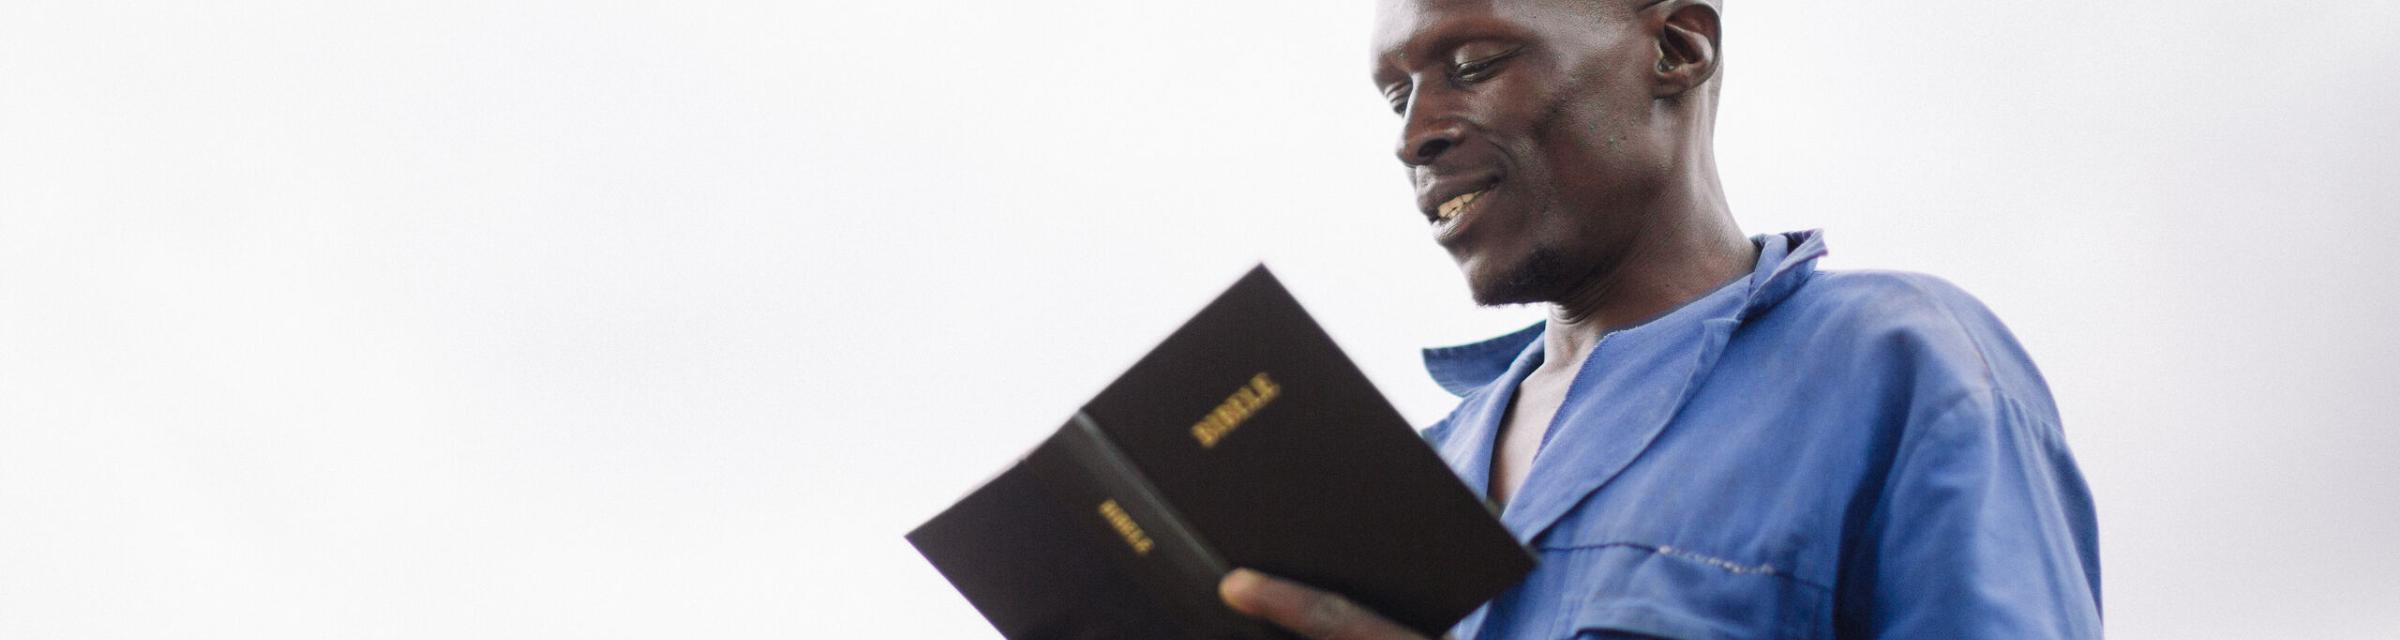 A Lesotho man reads publically from the Bible.